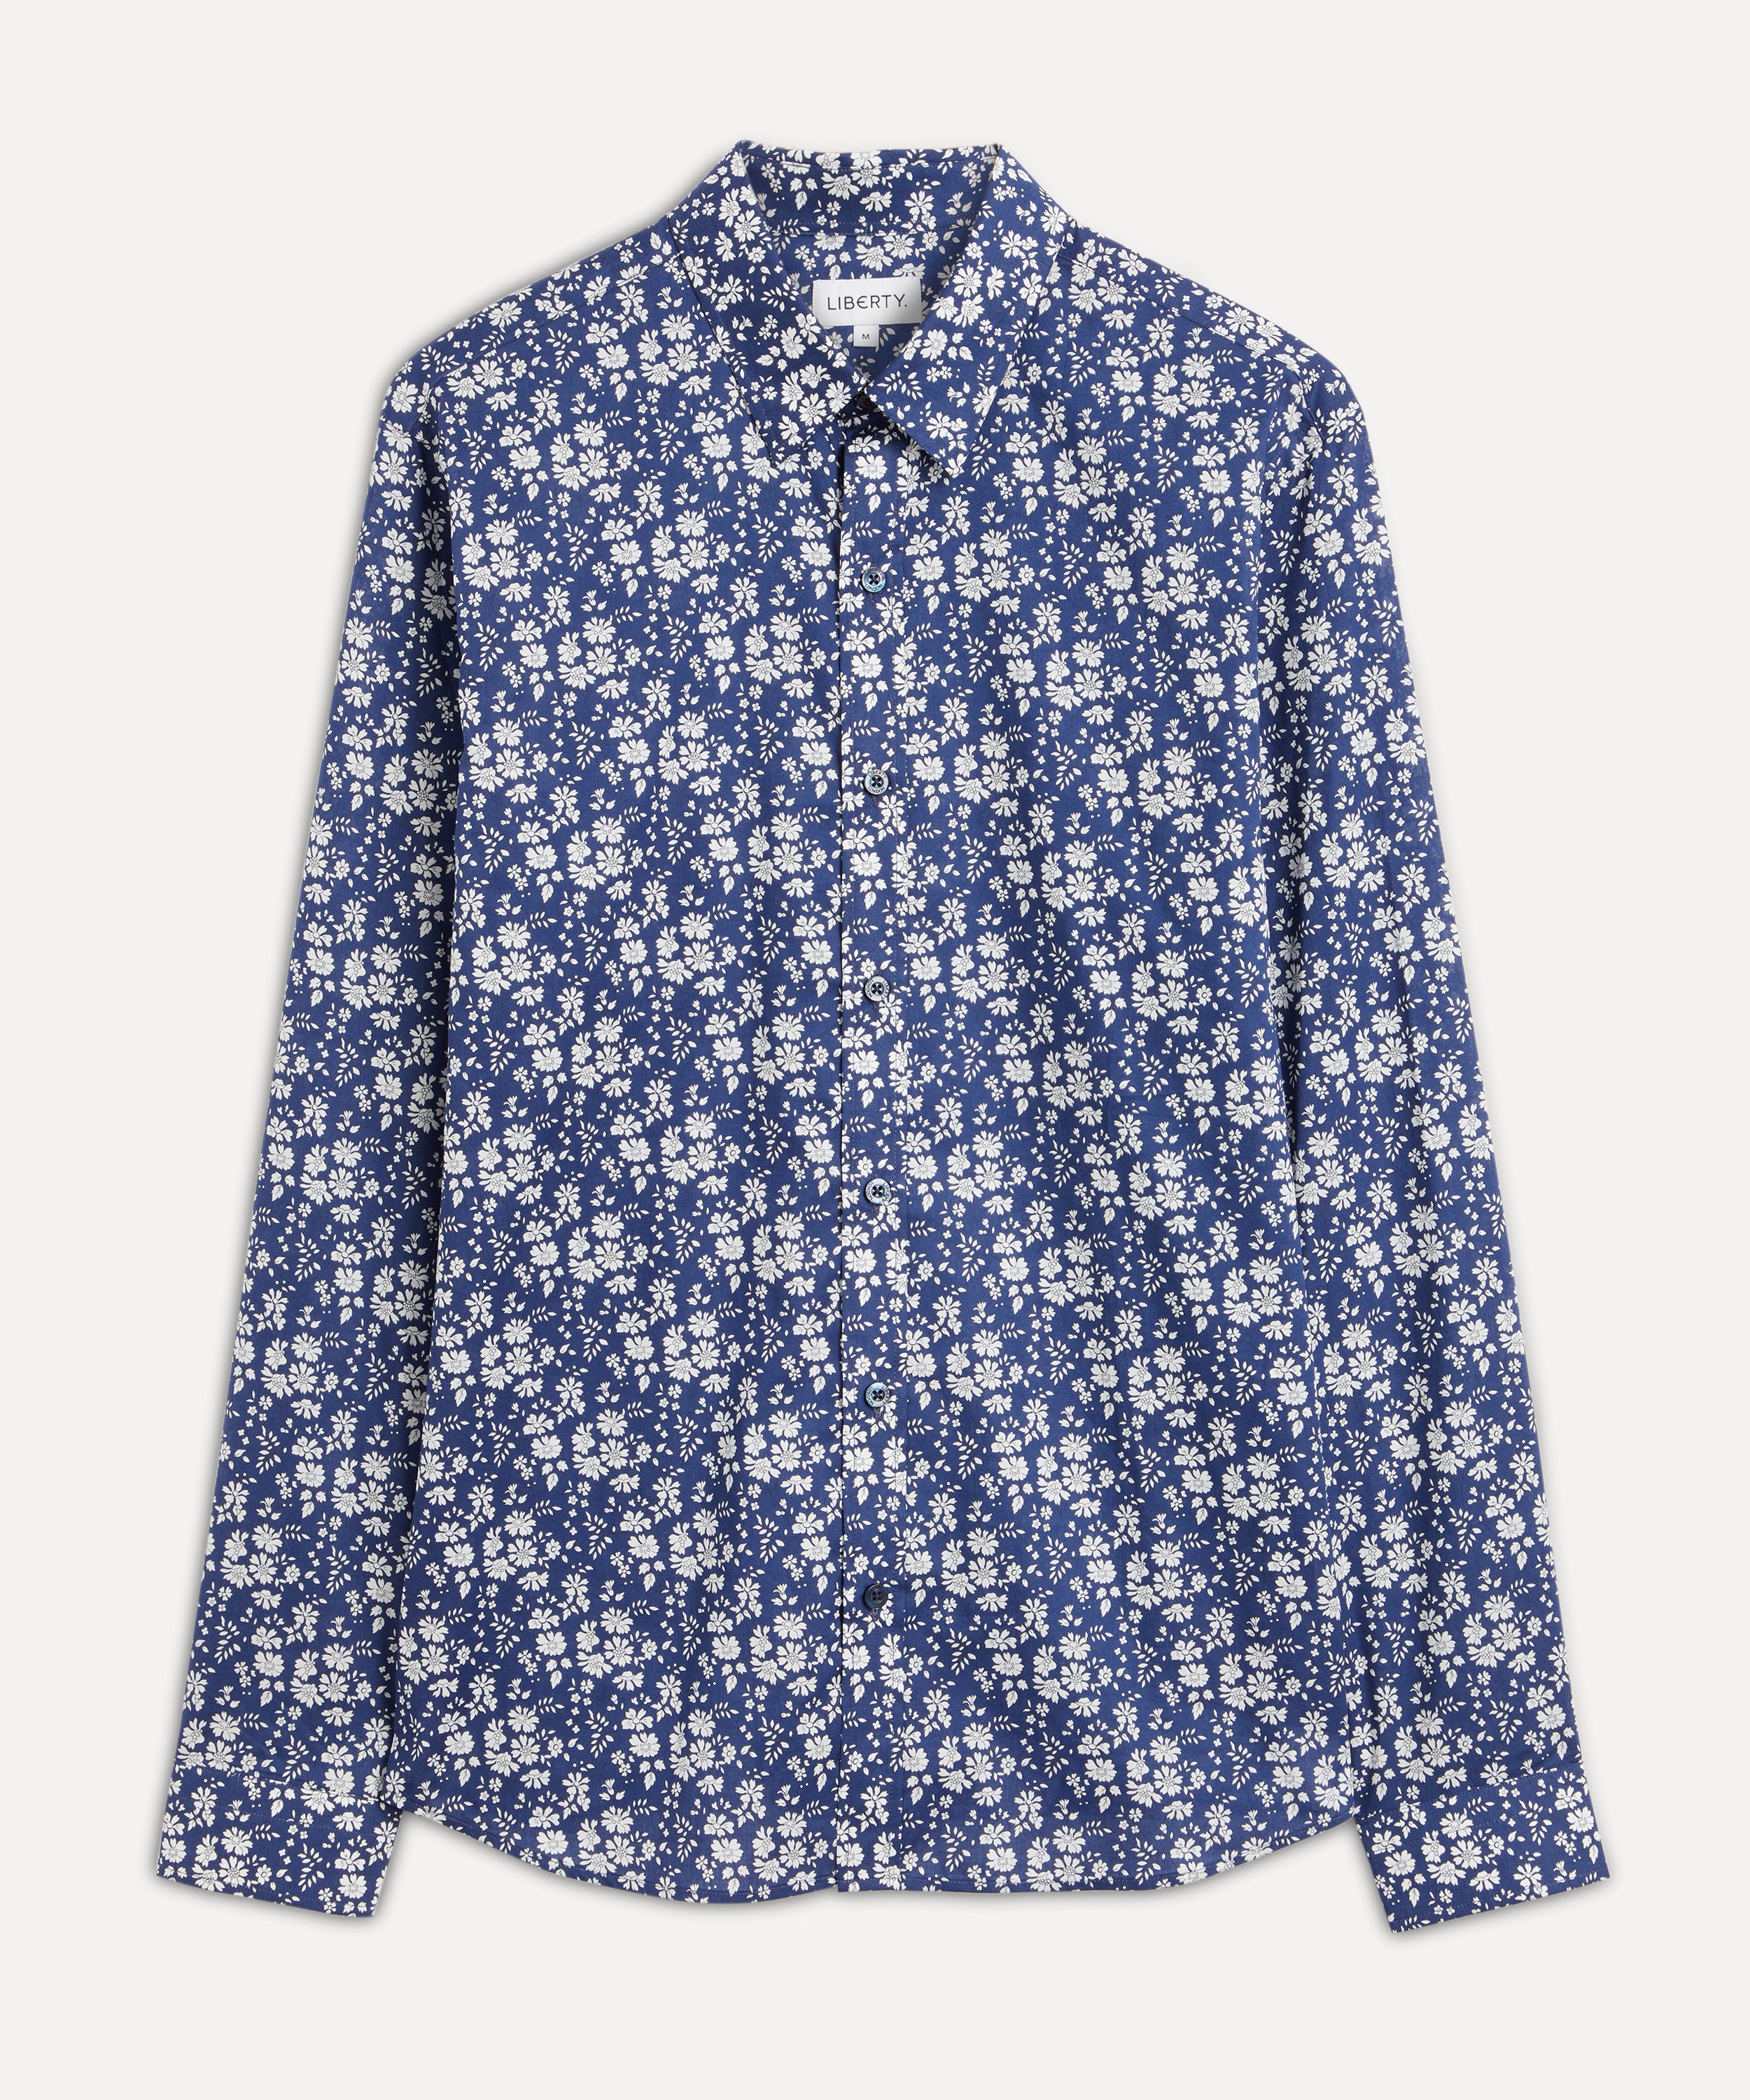 Liberty - Capel Lasenby Tana Lawn™ Cotton Casual Classic Shirt image number null